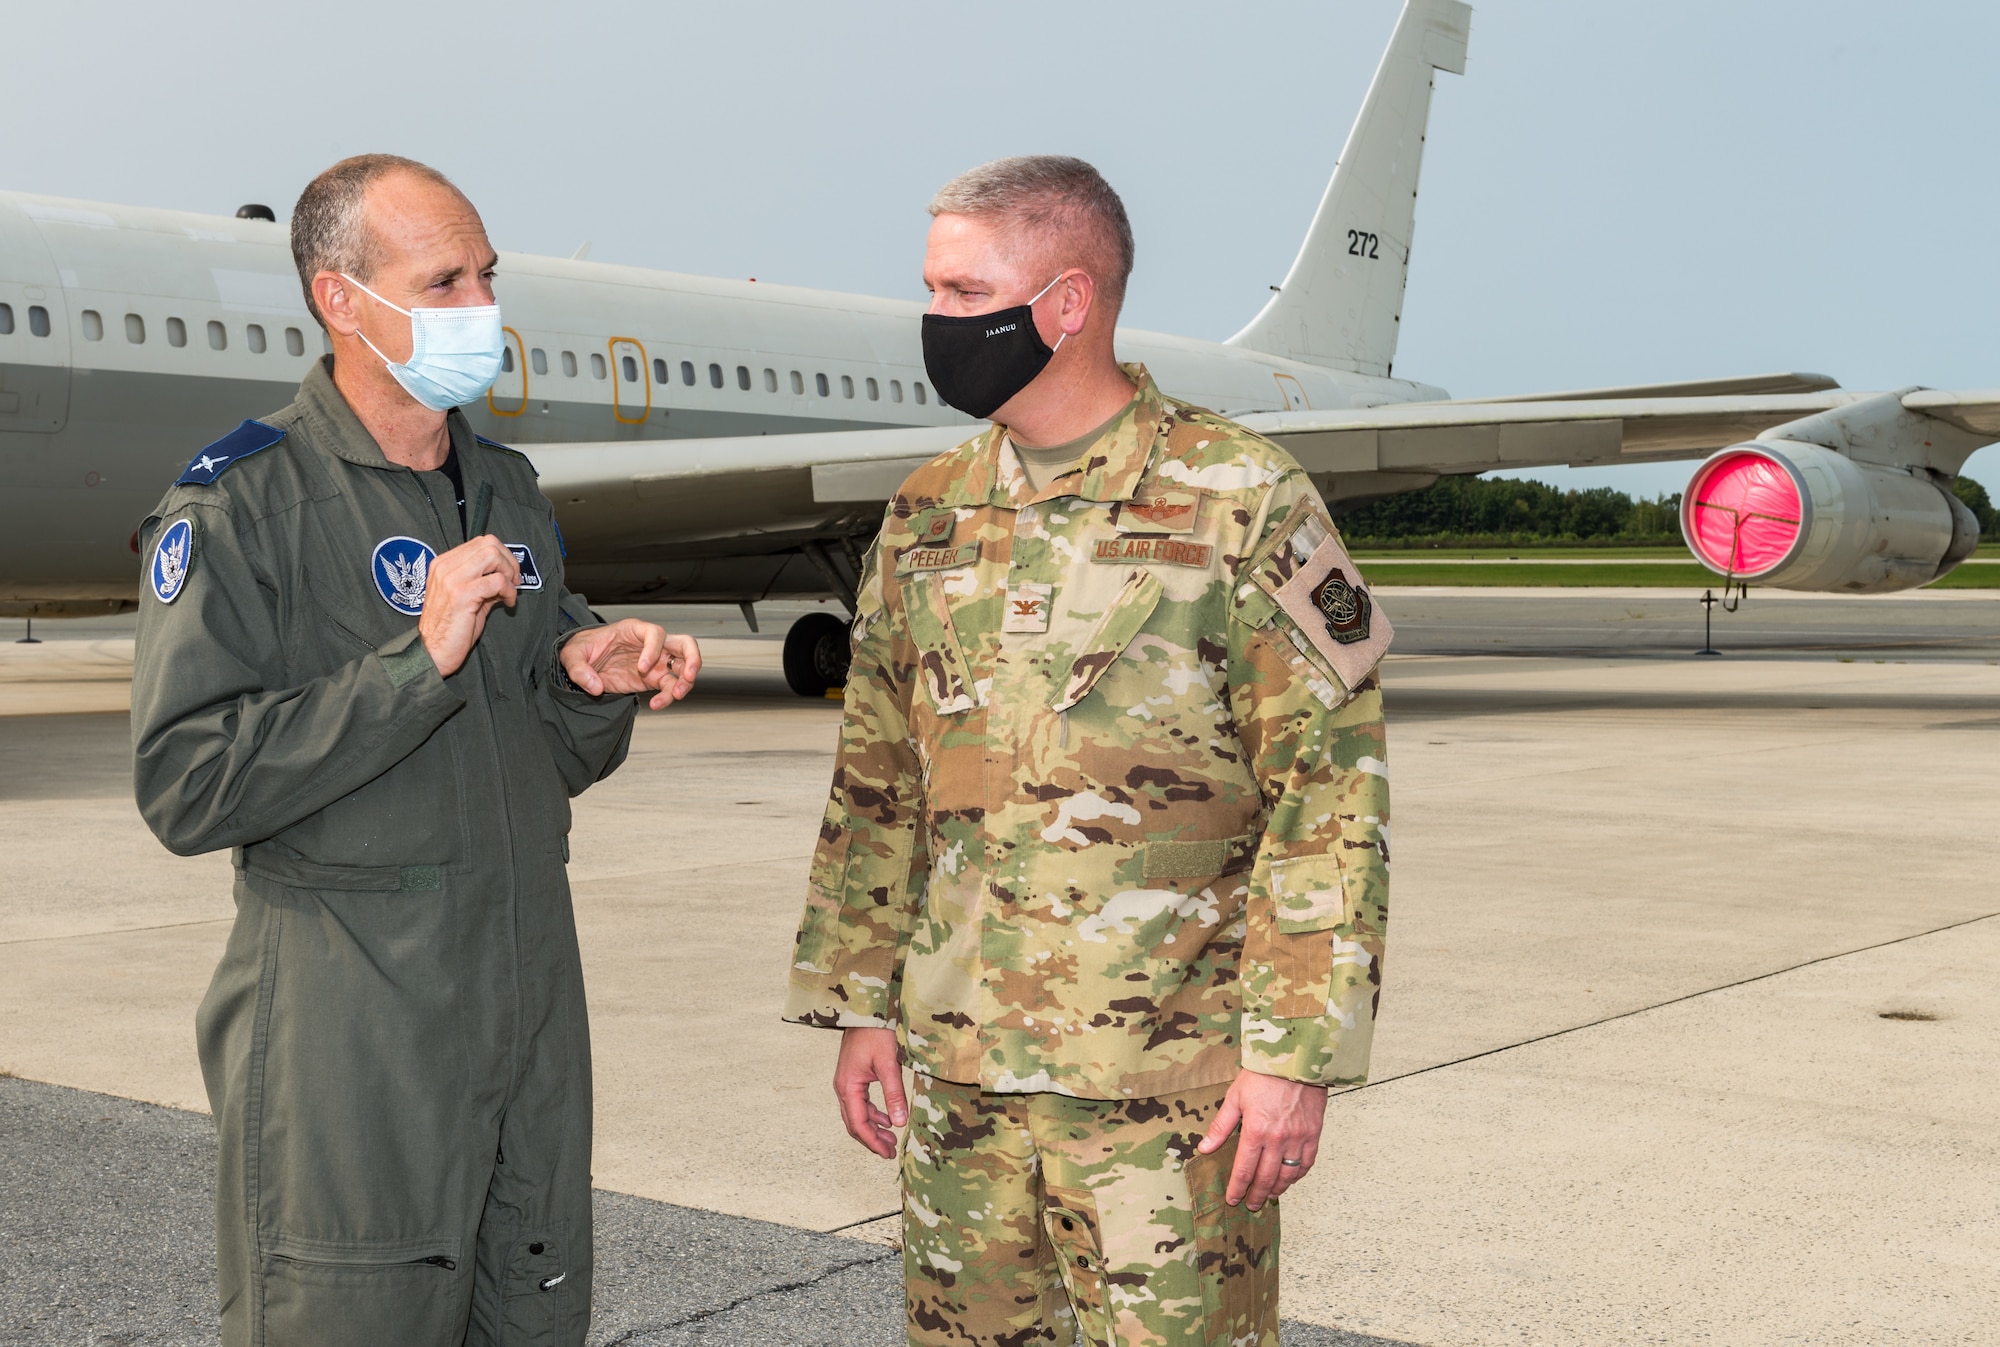 Brig. Gen. Amir Keren, Israeli air force attache and the deputy defense attache to the United States, speaks with Col. Mike Peeler, 436th Operations Group commander, Sept. 15, 2020, on the flight line at Dover Air Force Base, Delaware. Keren attended a foreign military sales operation involving Israel that Airmen from the 436th Airlift Wing facilitated. Over the past 70 years, the U.S. and Israel have developed unbreakable bonds through cooperation in security, economics and business, scientific research and innovation and people-to-people exchanges. Due to its strategic location, Dover AFB regularly supports foreign military sales operations. (U.S. Air Force photo by Roland Balik)